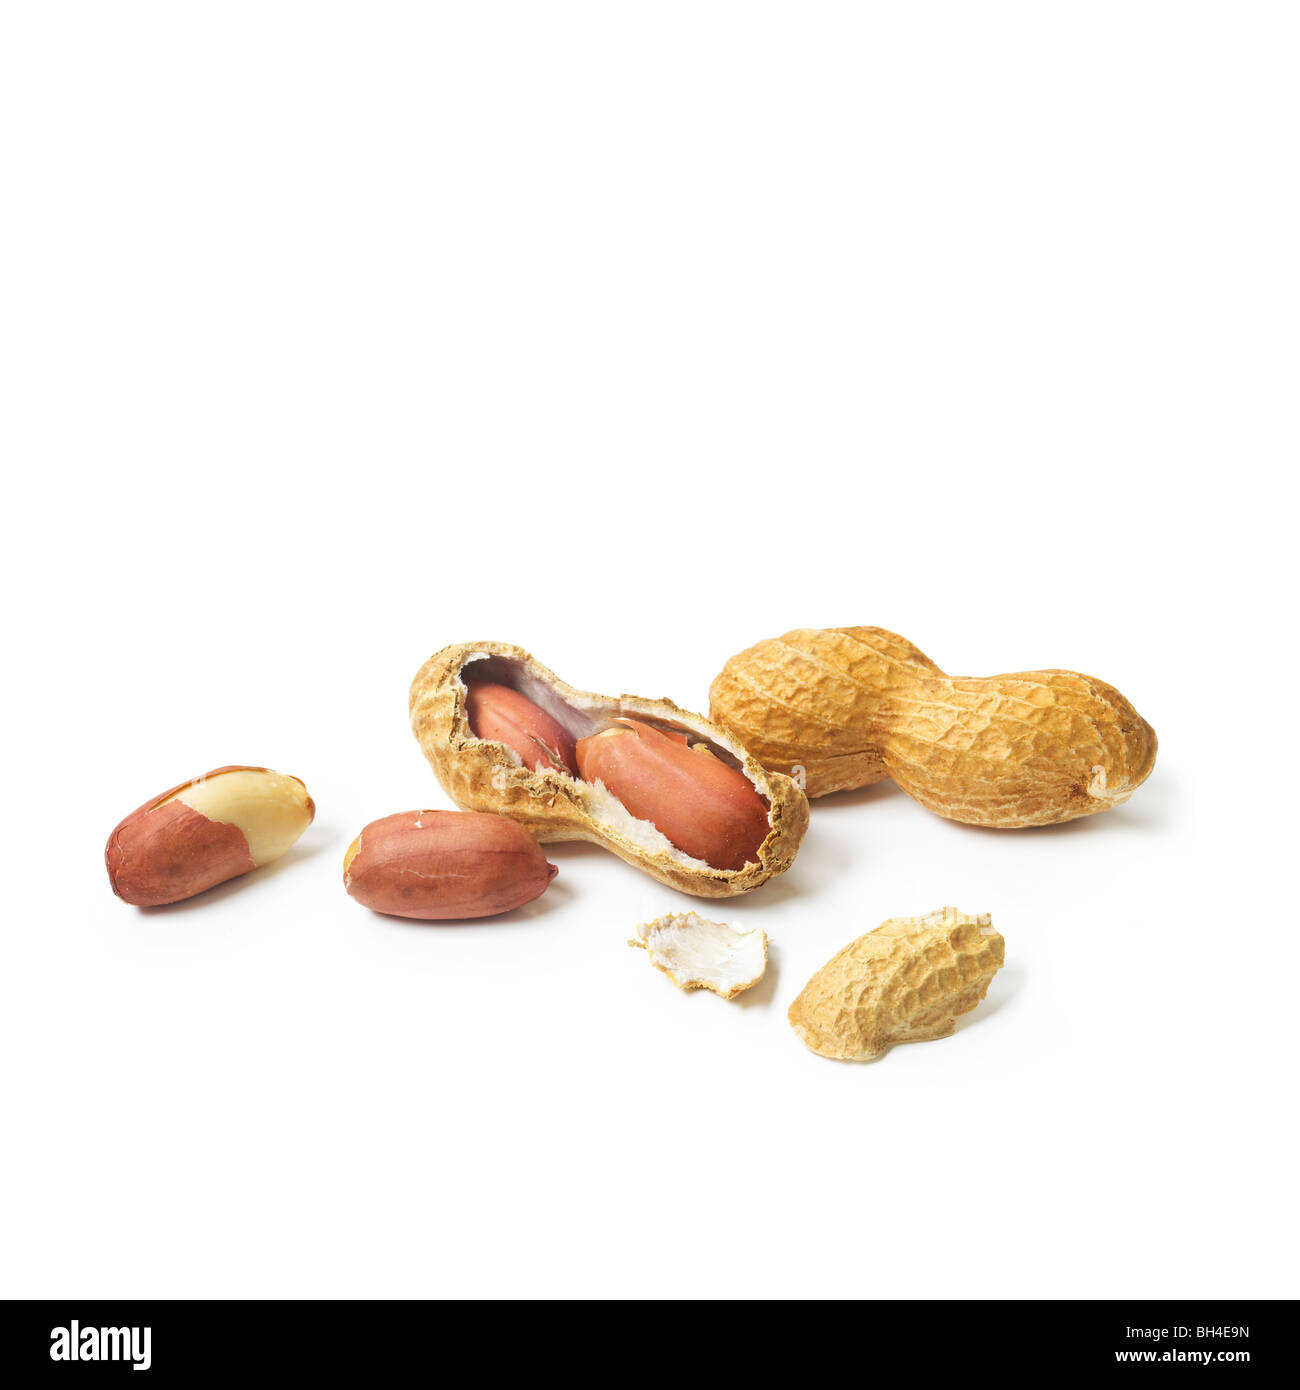 Peanuts and shells on a white background Stock Photo